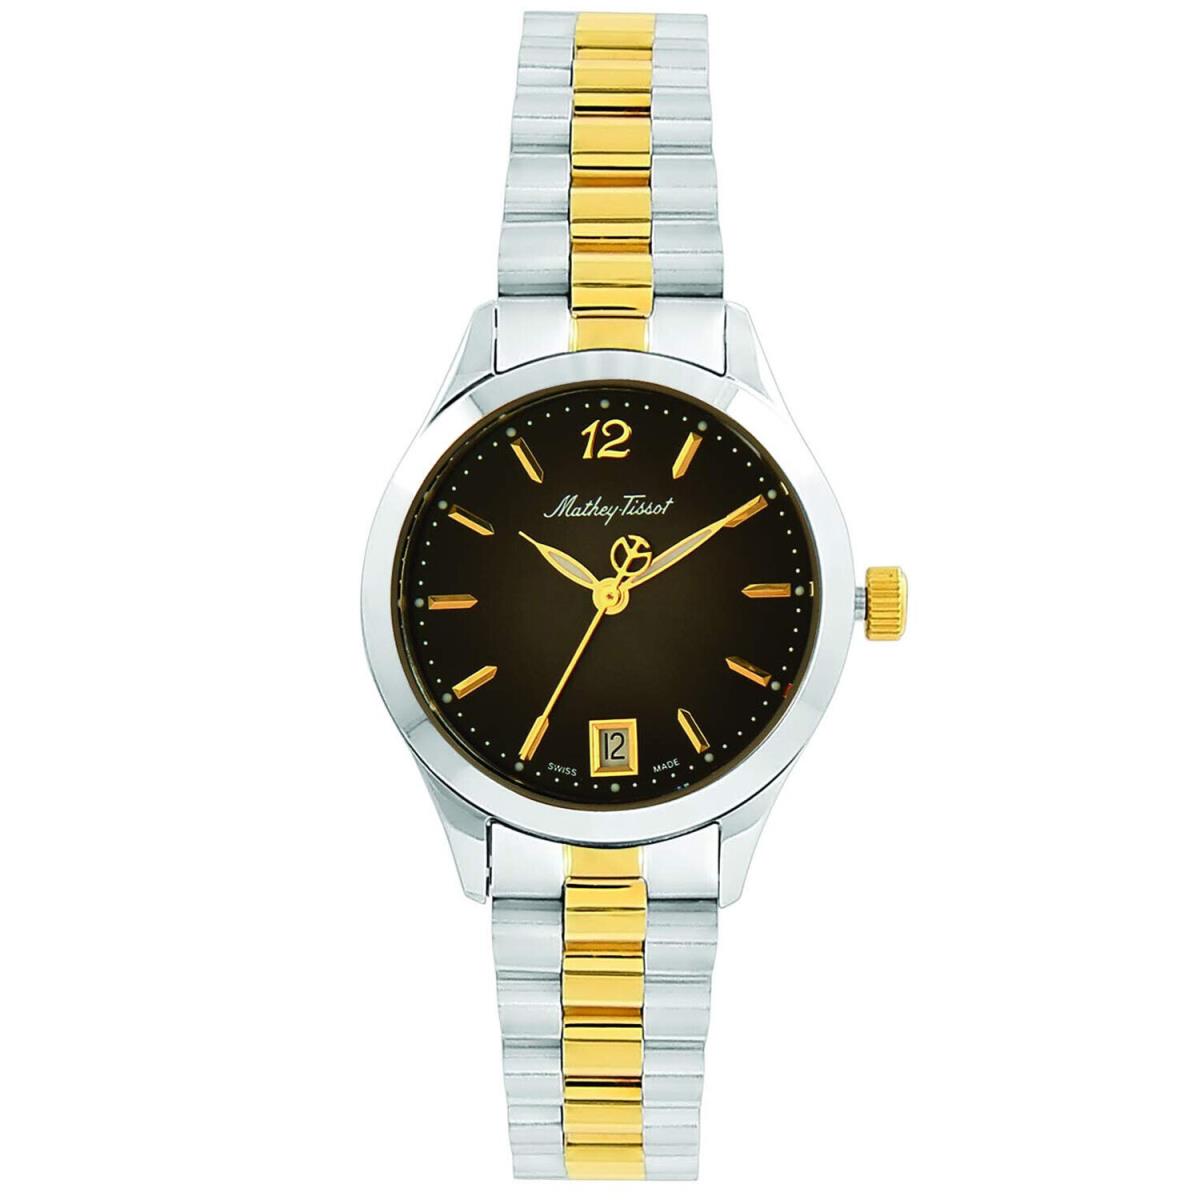 Mathey Tissot Women`s Urban Black Dial Watch - D411MBN - Dial: Black, Band: Multicolor